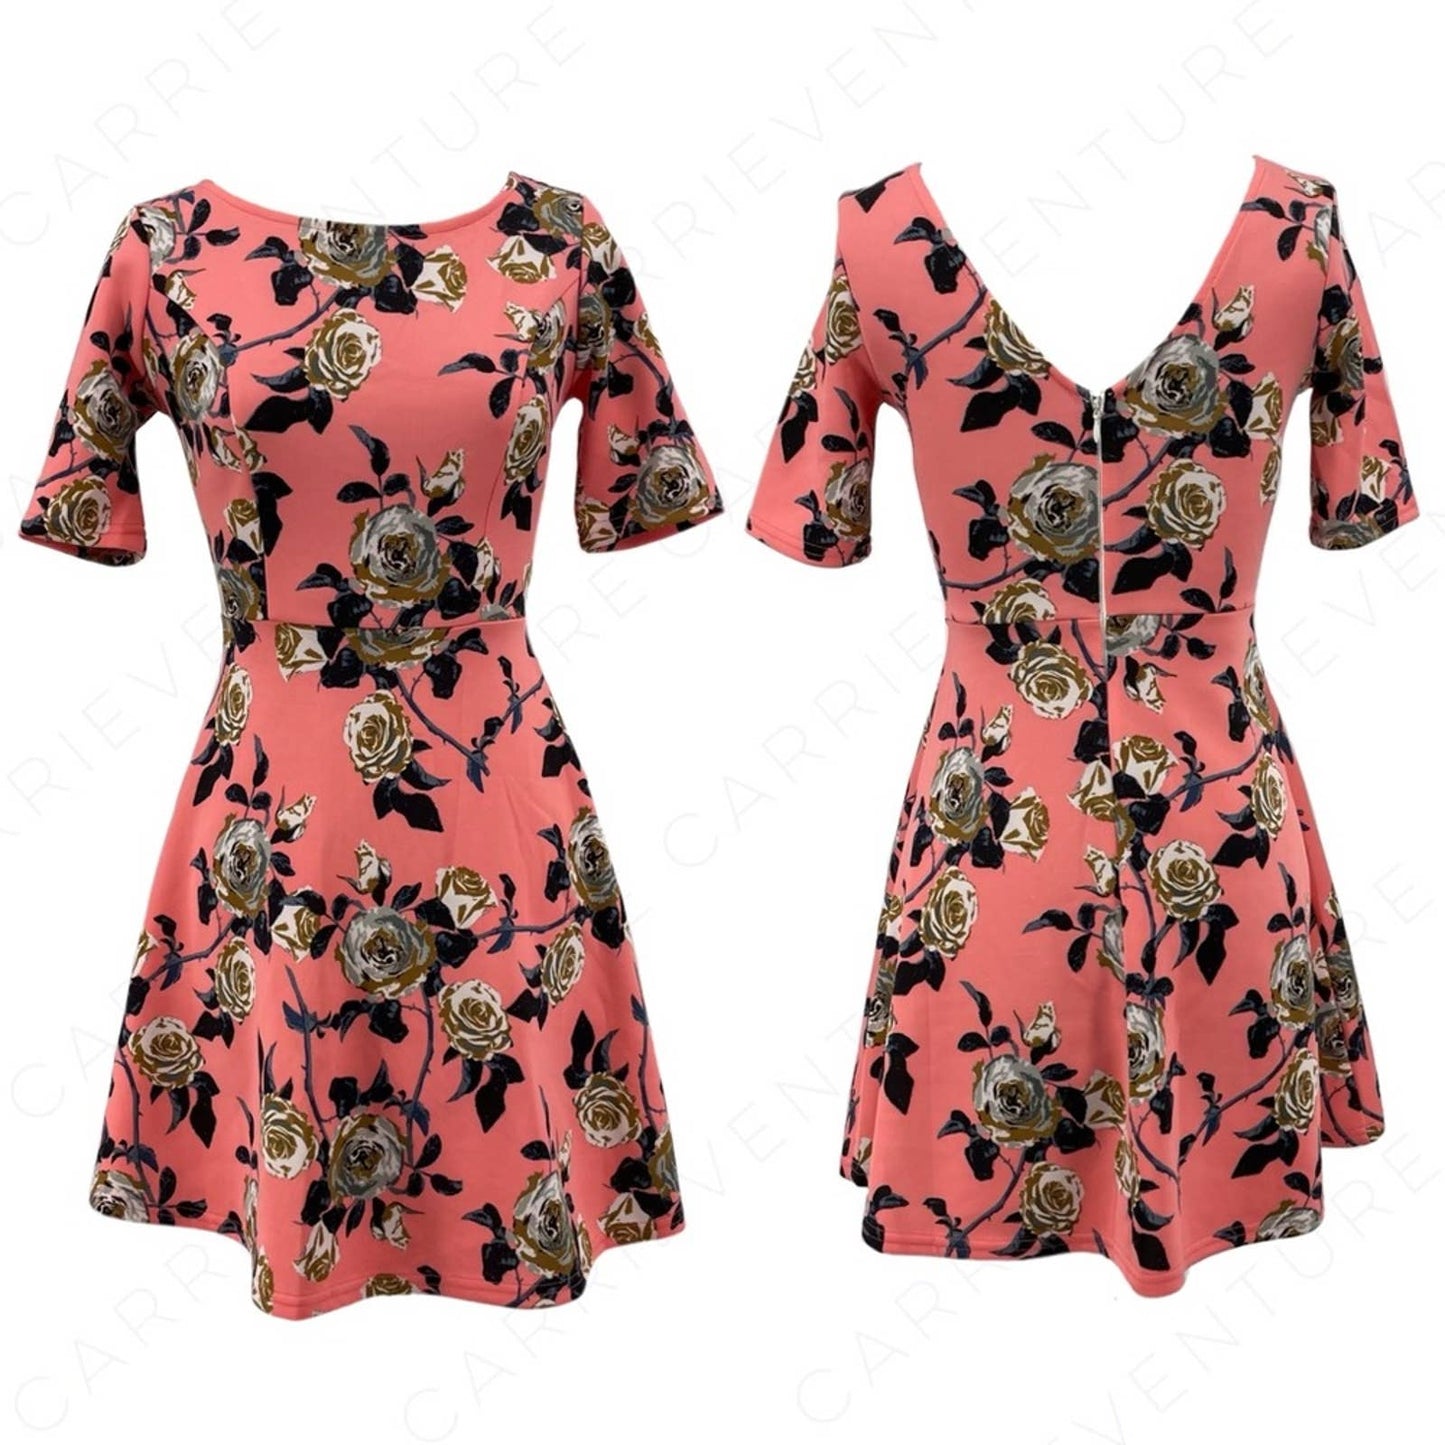 Forever 21 Coral Pink Roses Floral Gray Print Tea Party Garden Shower Dress Size S